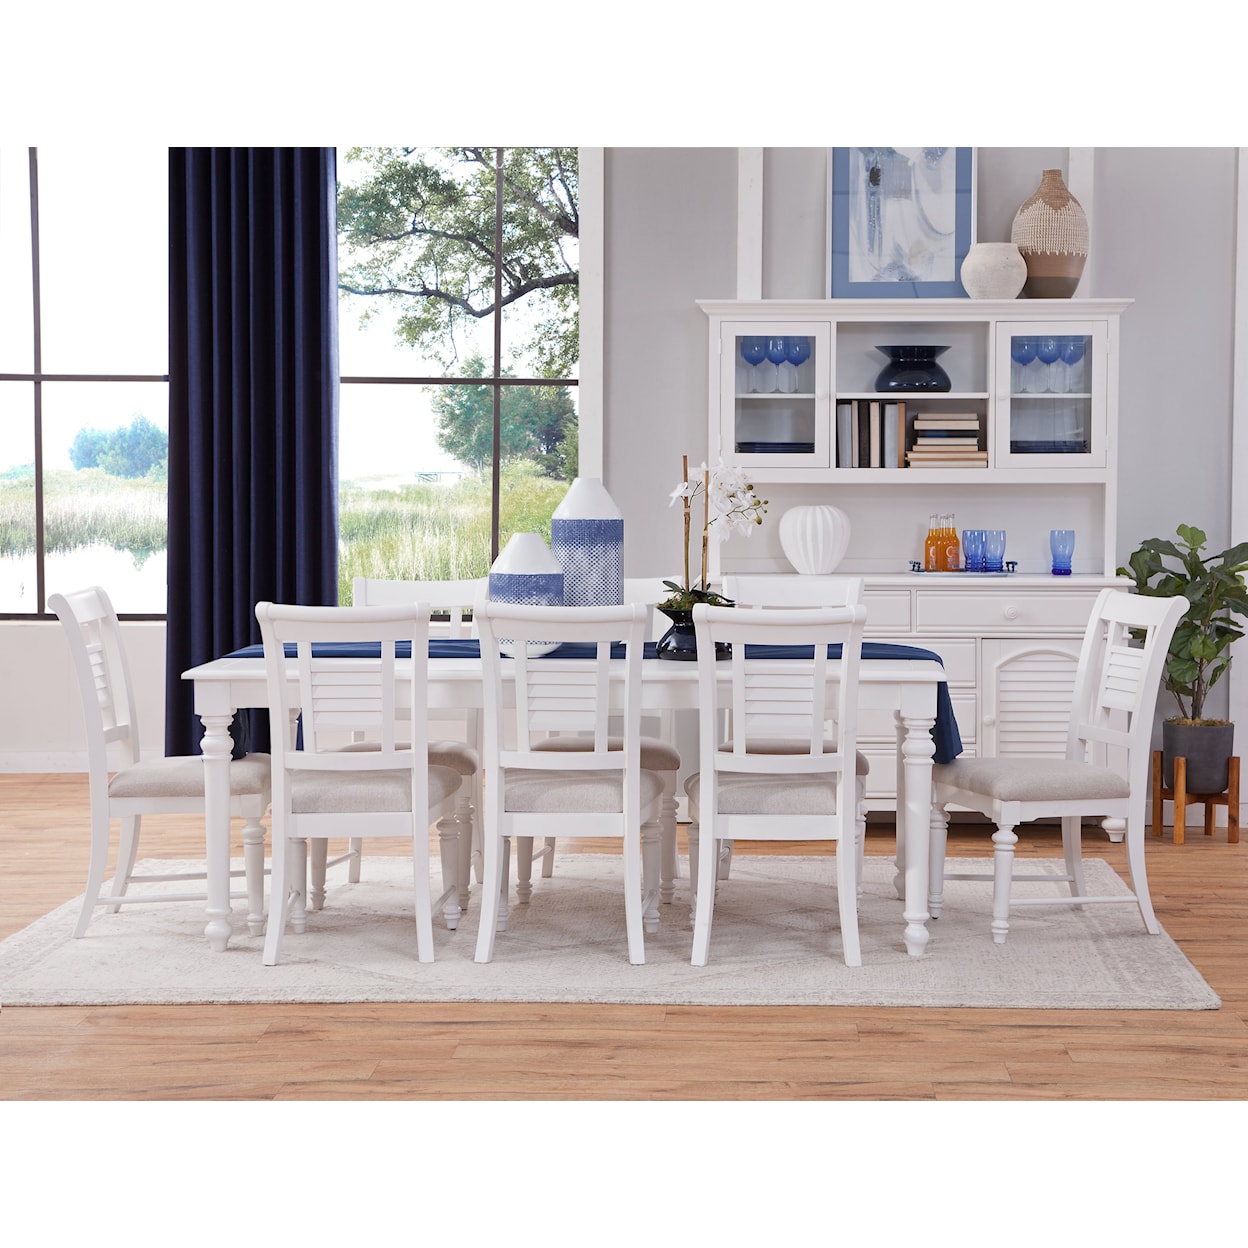 American Woodcrafters Cottage Traditions 7-Piece Dining Set